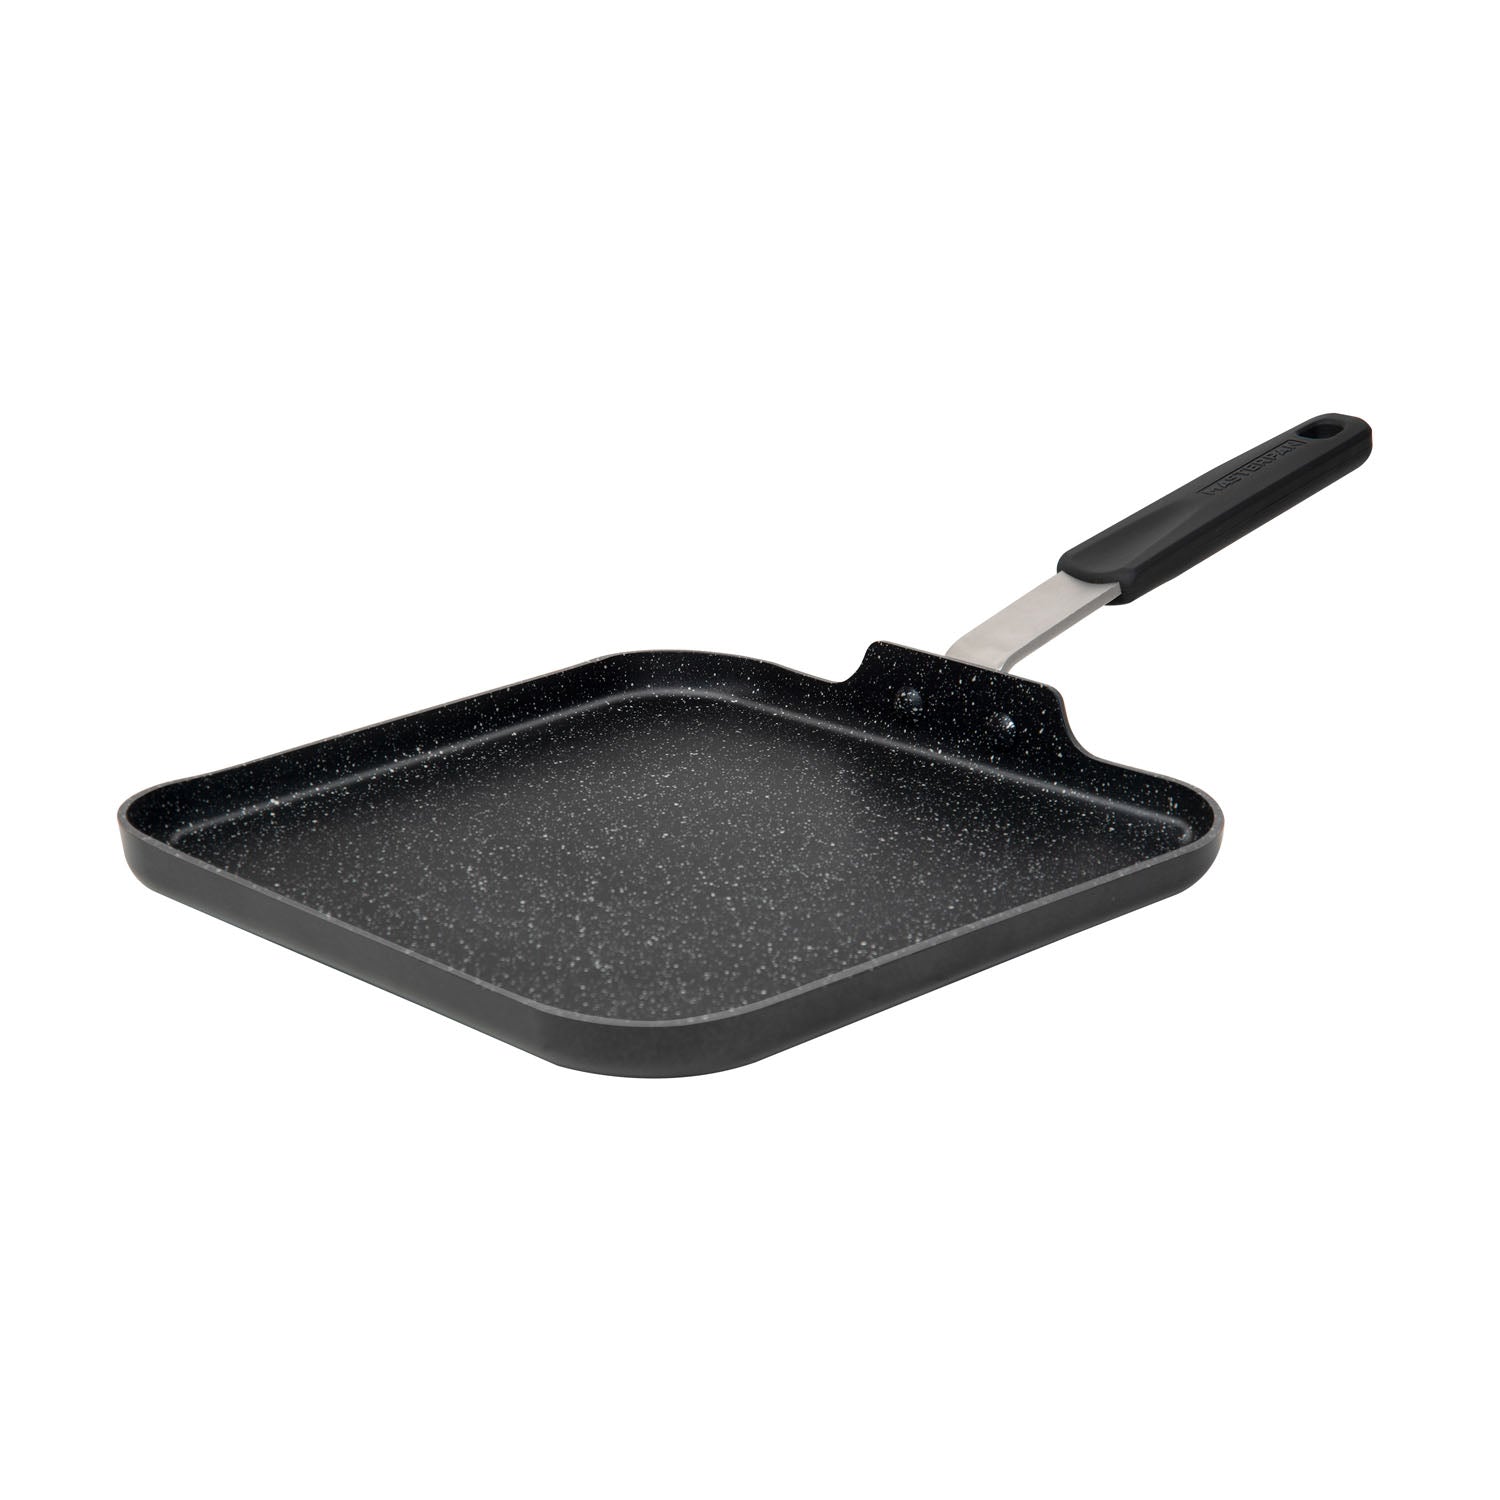 MASTERPAN Nonstick  Crepe Pan & Griddle with Silicone Grip, 11